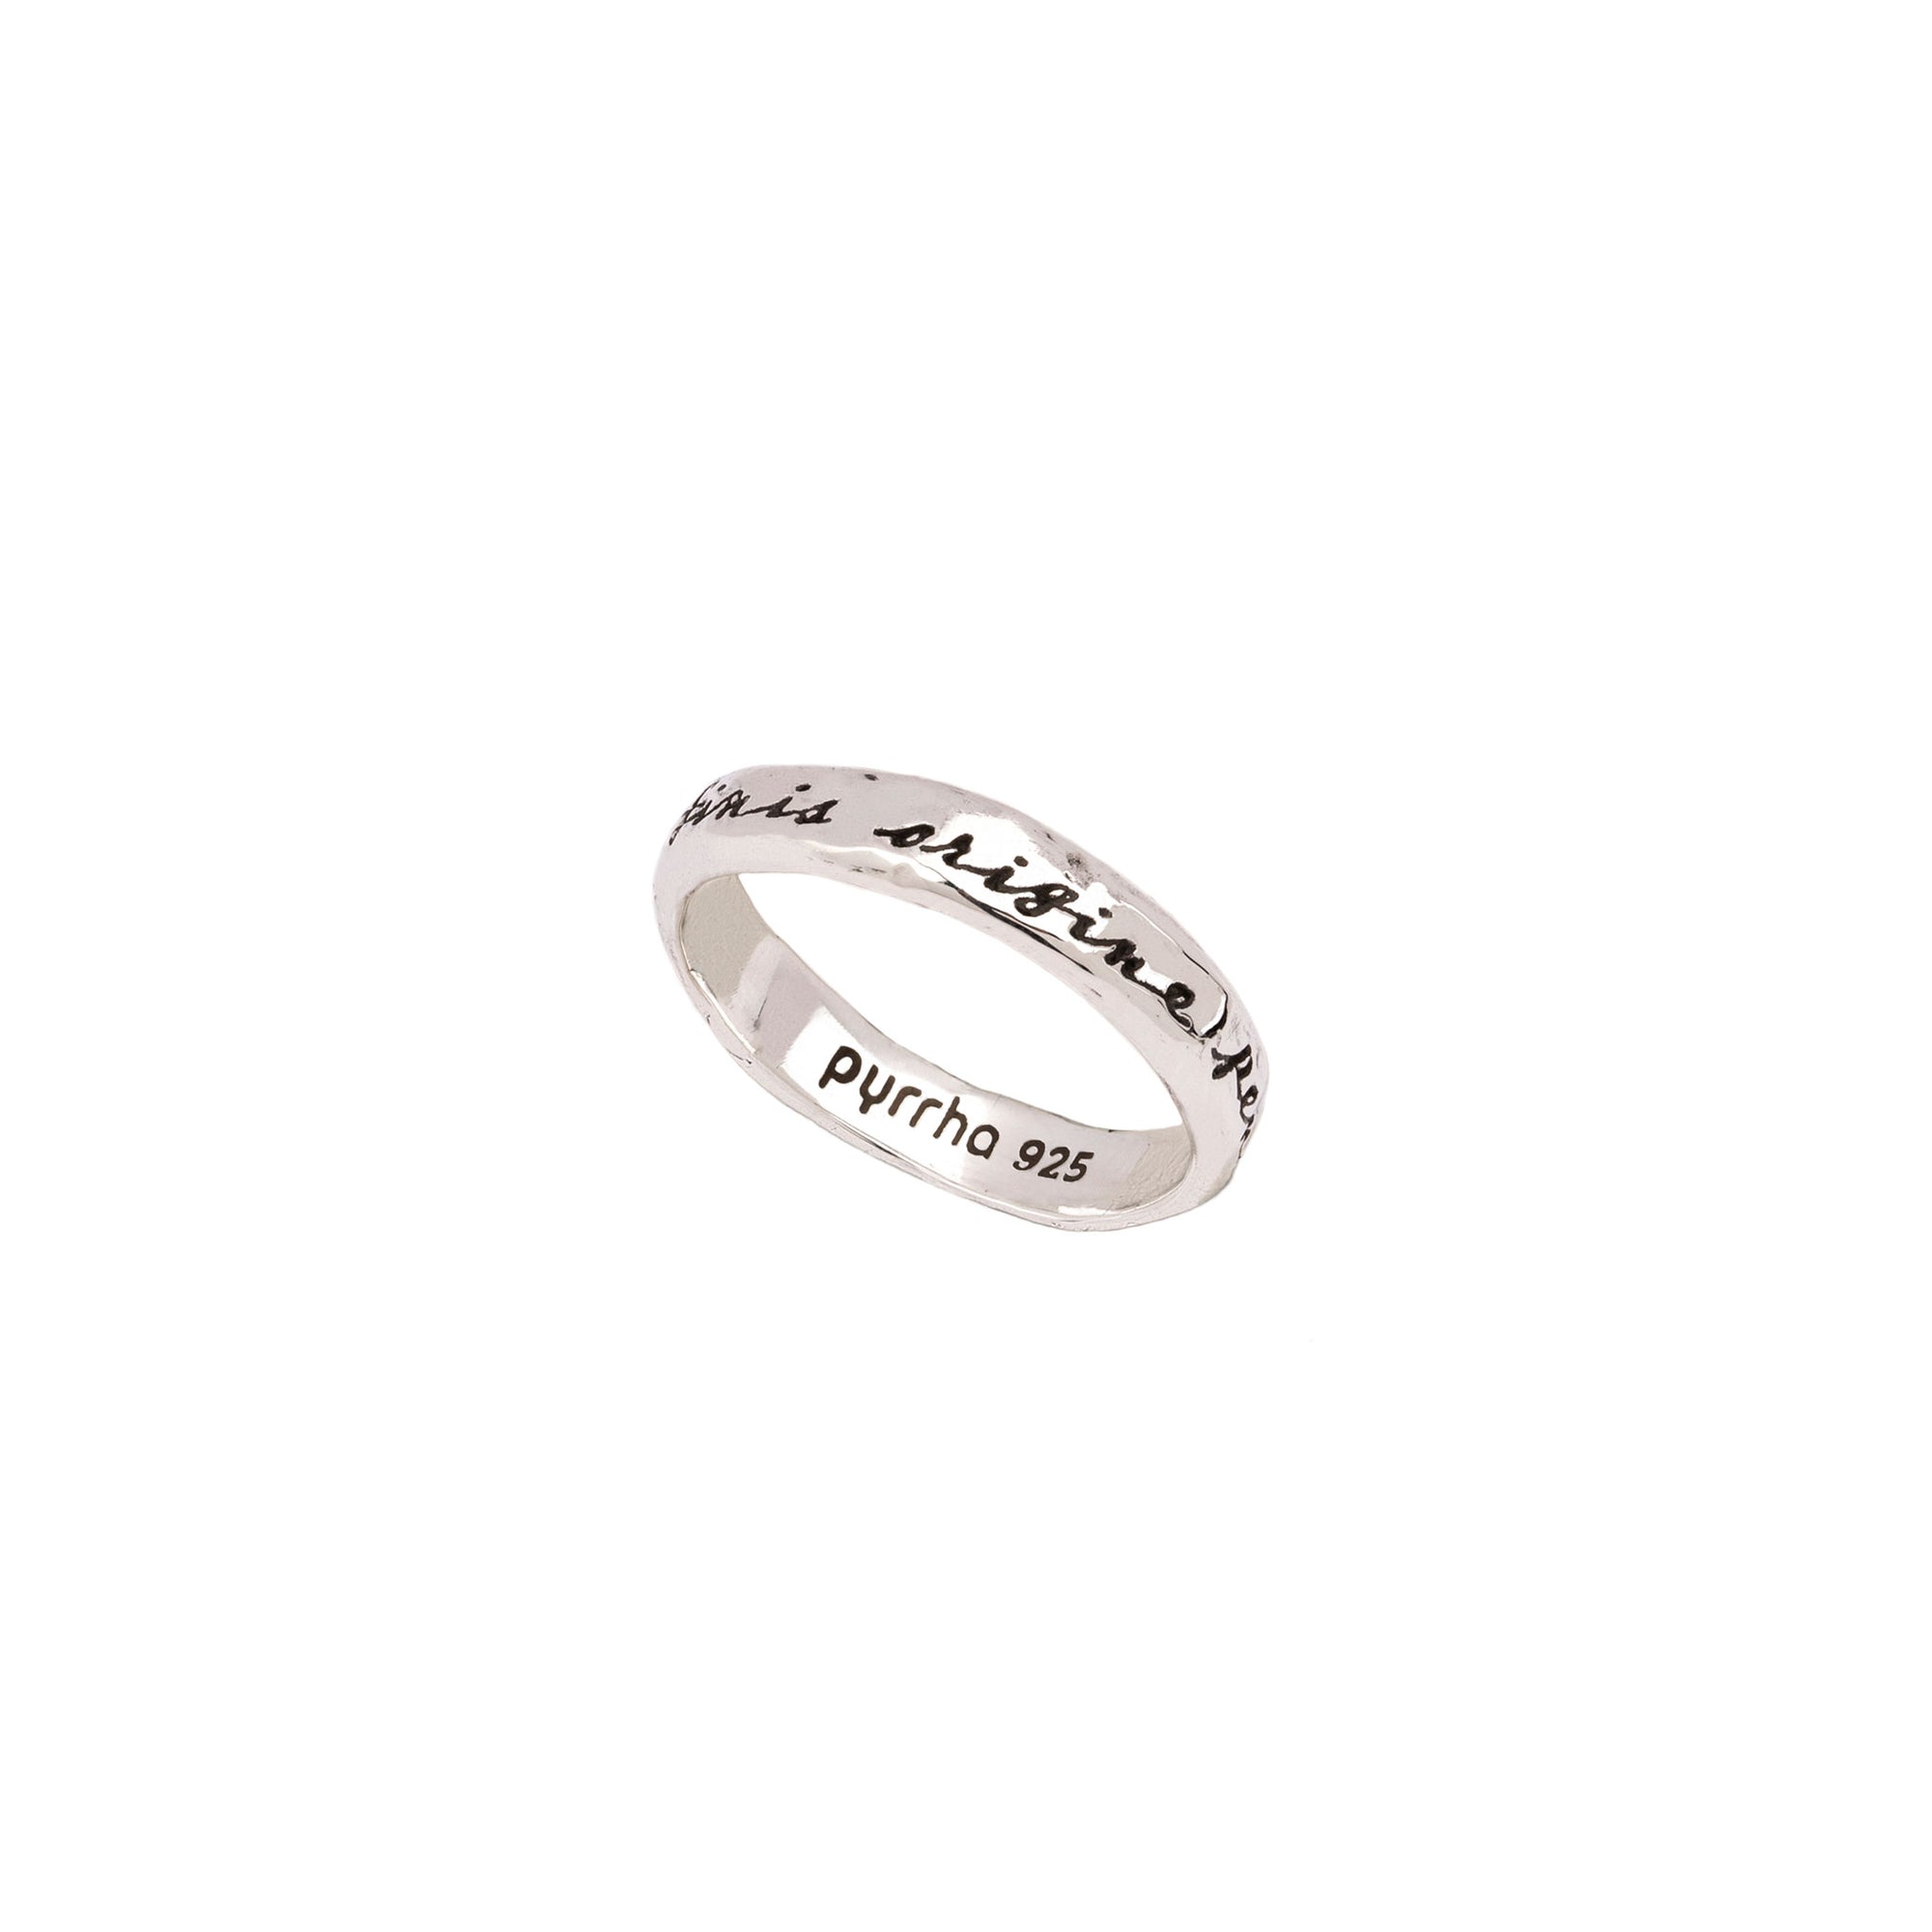 An silver band ring engraved with the idea that the end depends on the beginning